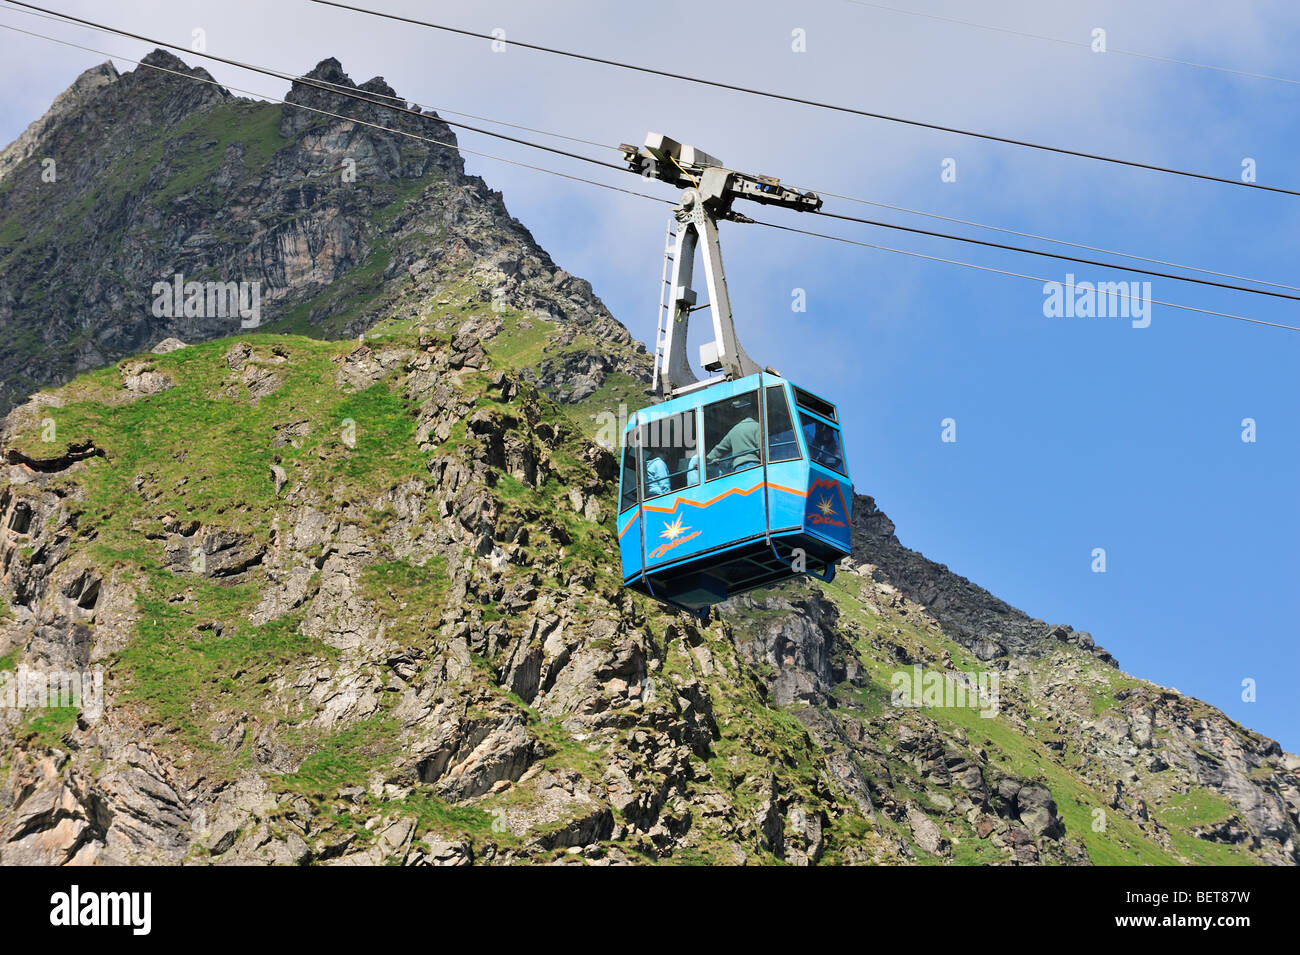 Tourists in cable car / cableway / cable-lift on a cloudy day in the mountains, Swiss Alps, Switzerland Stock Photo